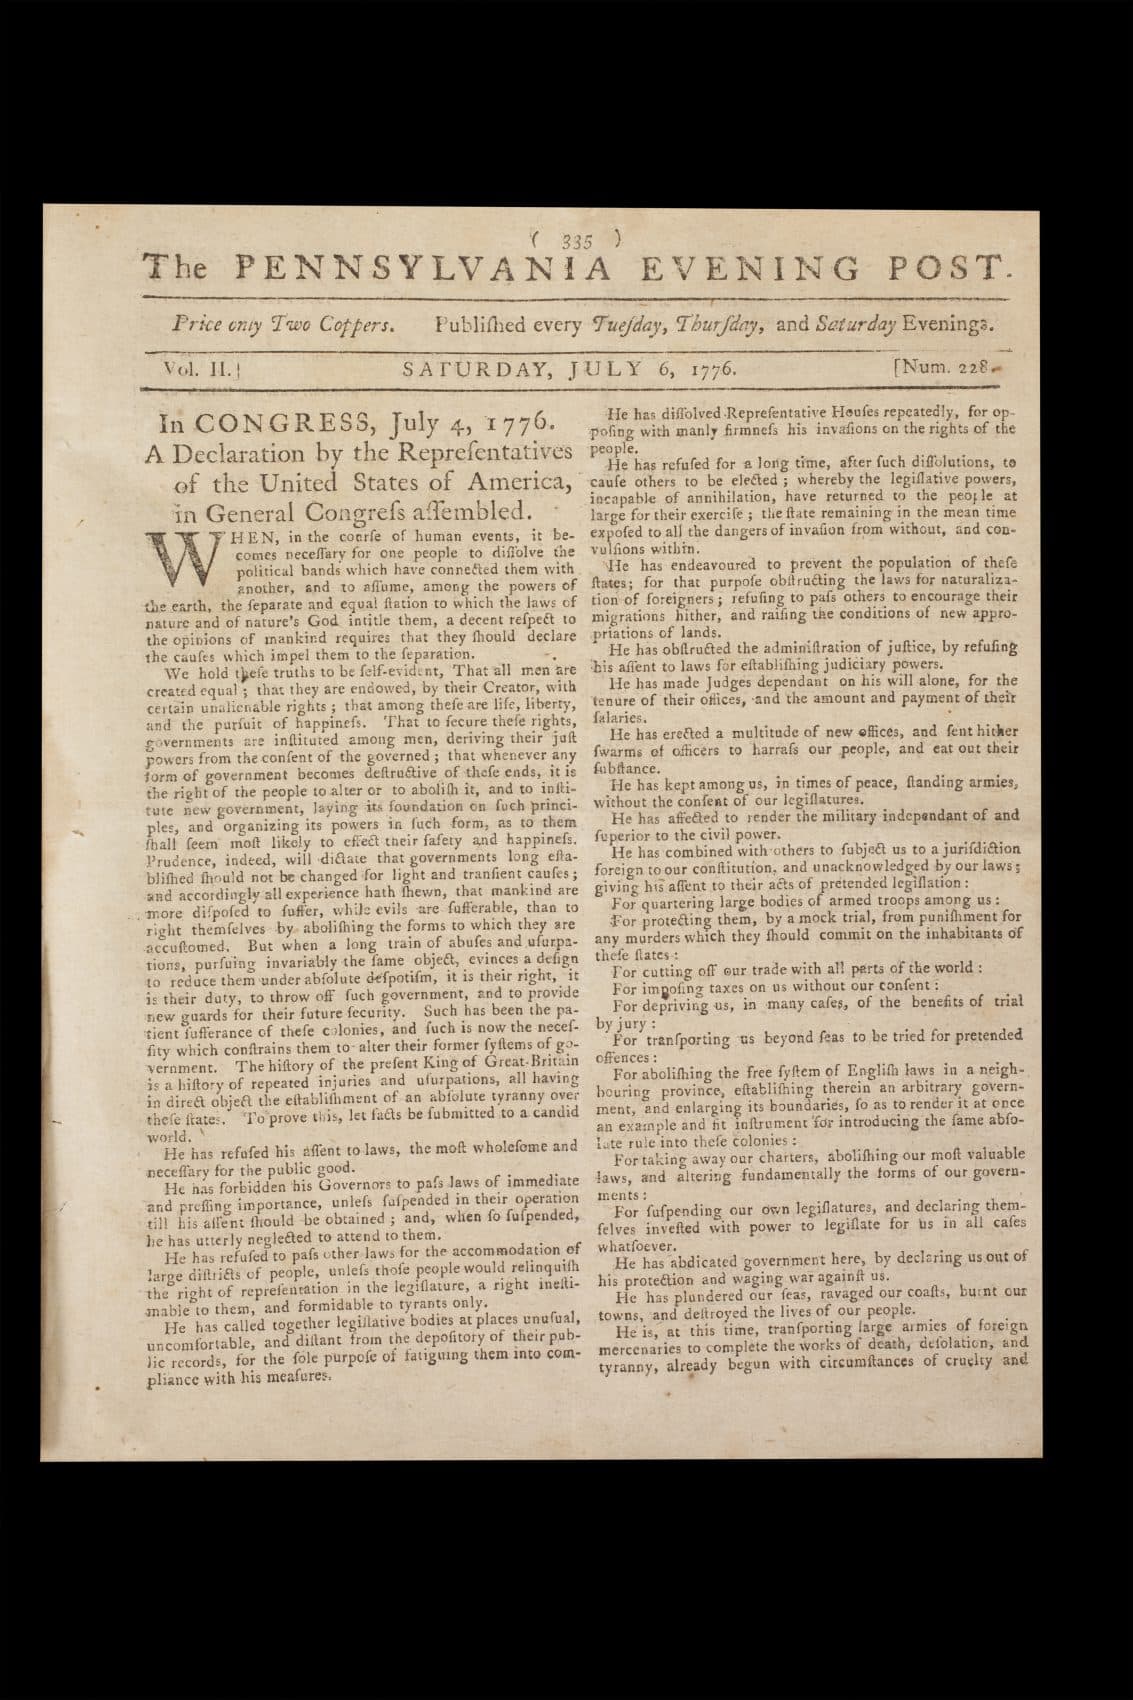 The first newspaper printing of the newly adopted Declaration of Independence. (Lisa J. Godfrey)